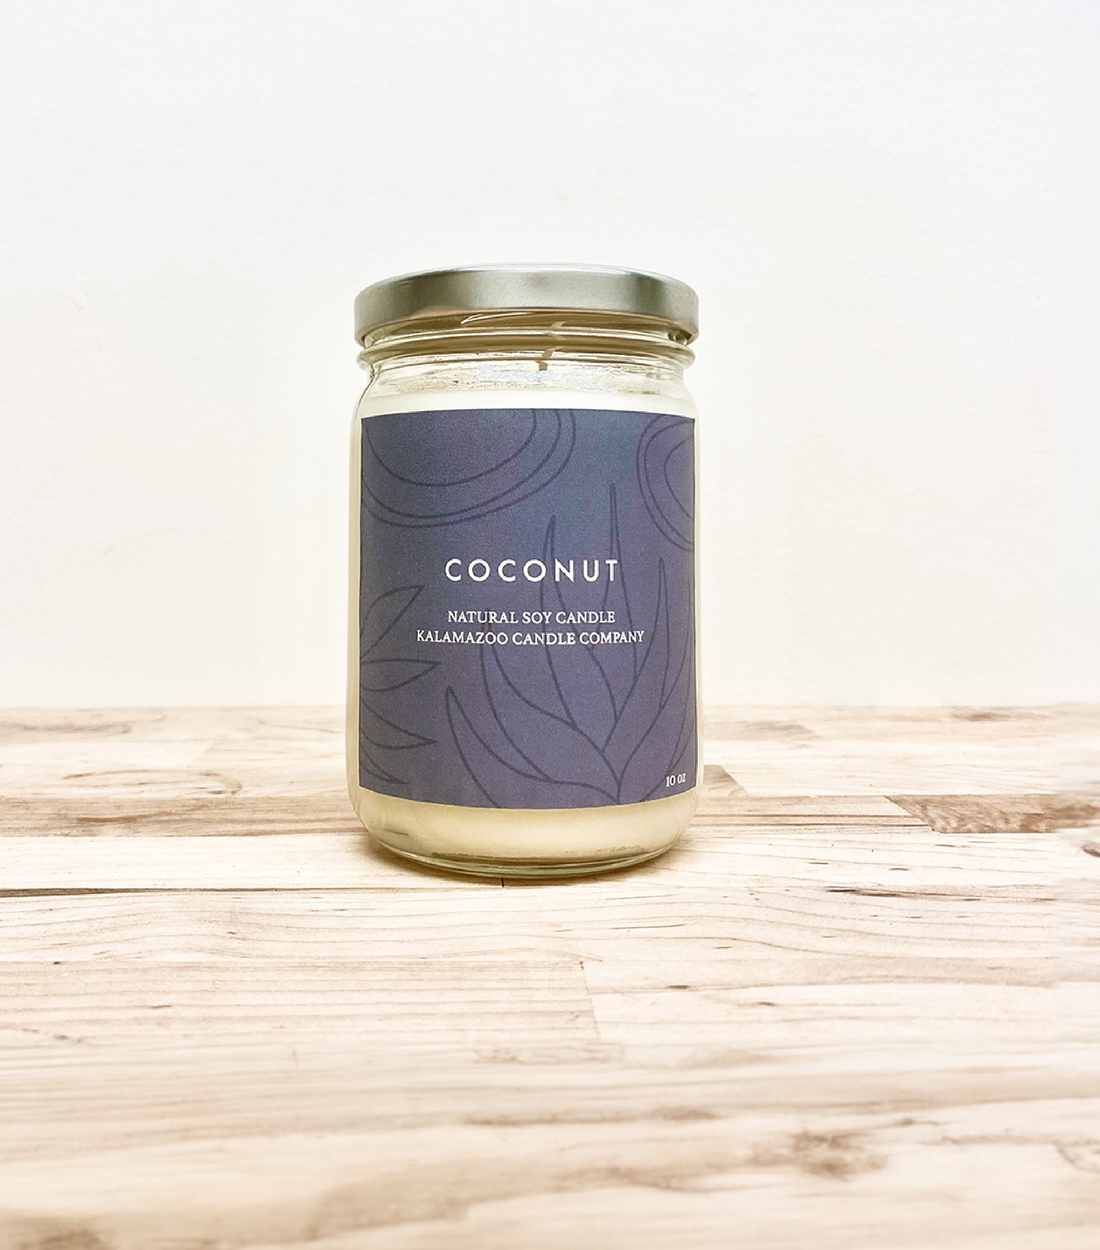 A perfect escape, this candle encapsulates a warm, tropical breeze. Hints of mango nectar and green melon surprise while coconut water refreshes your mind. Made in Kalamazoo, MI USA.